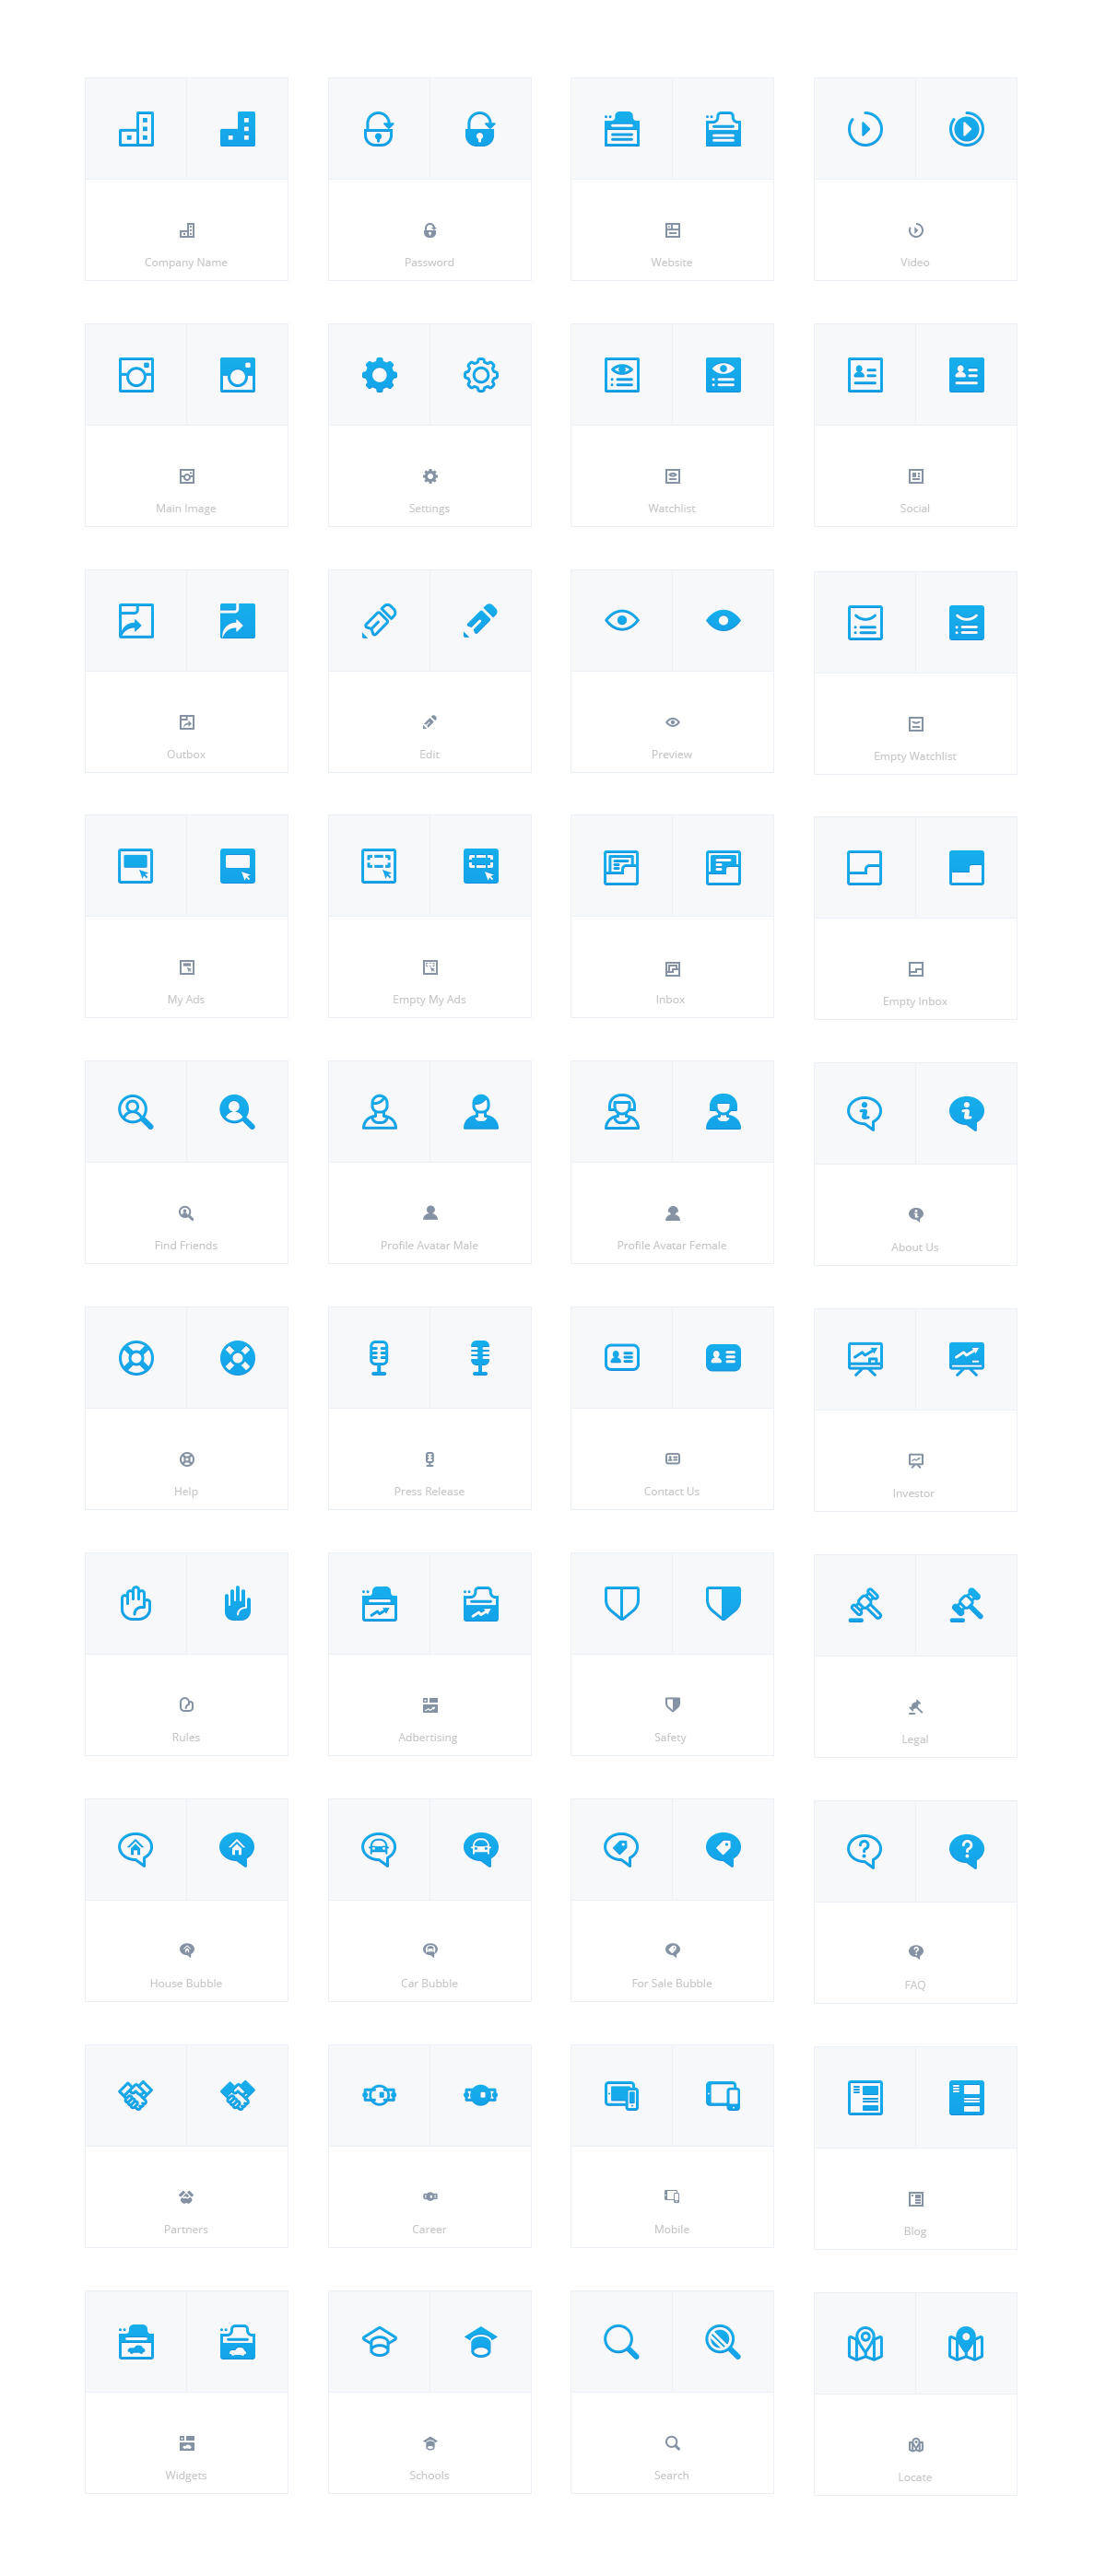 Dribbble - All_Icons.jpg by spovv